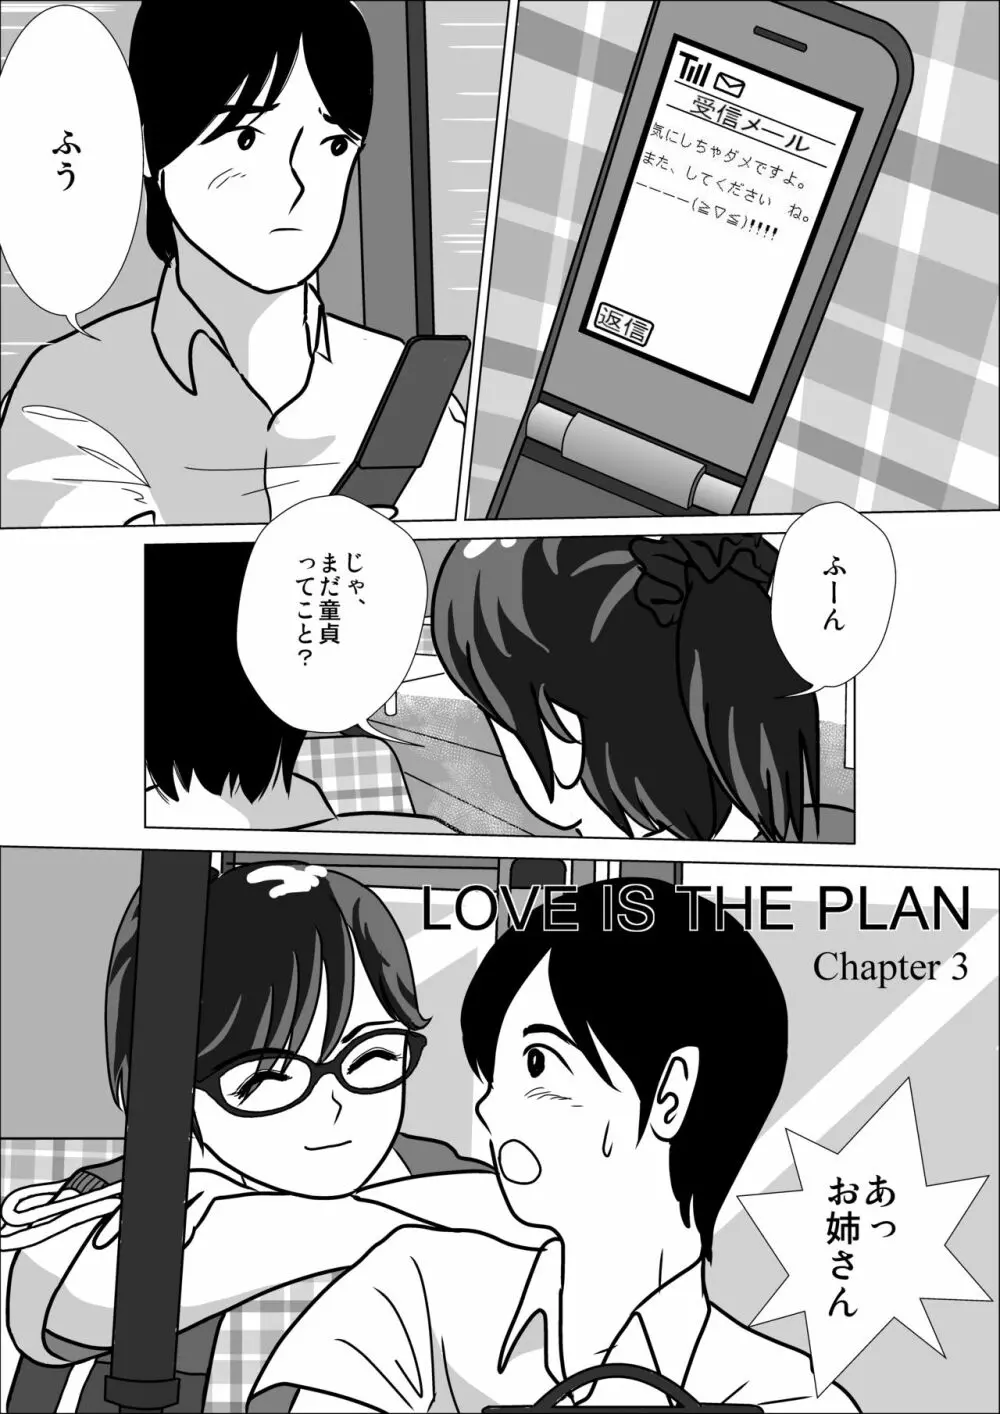 LOVE IS THE PLAN Chapter 3 - page6